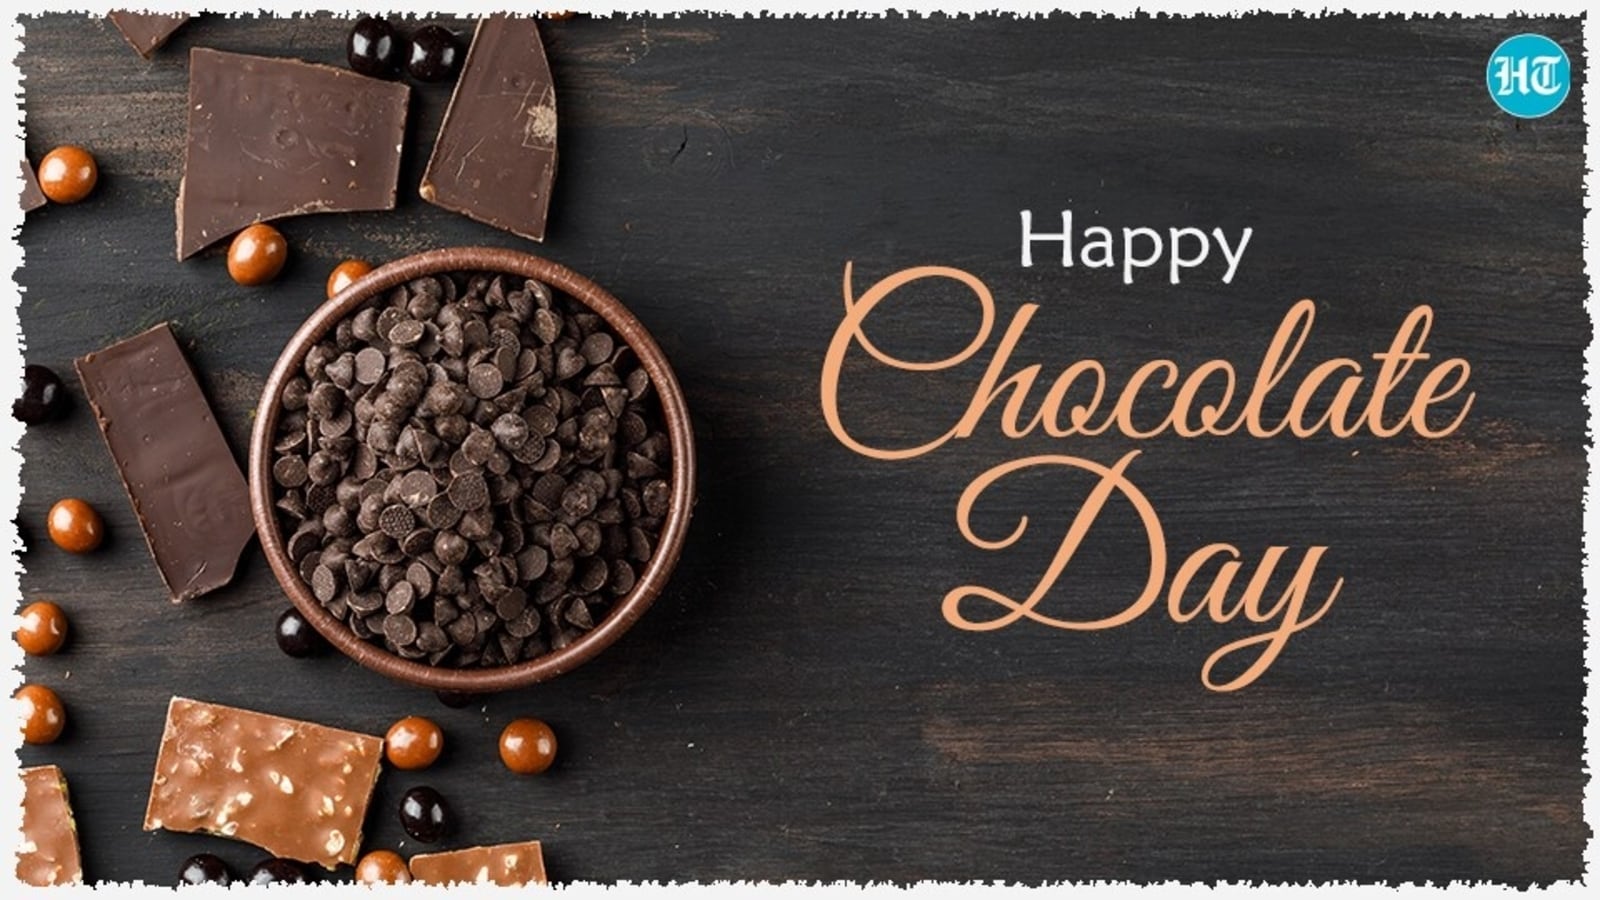 The Ultimate Collection of Happy Chocolate Day Images – Over 999 Pictures in Full 4K